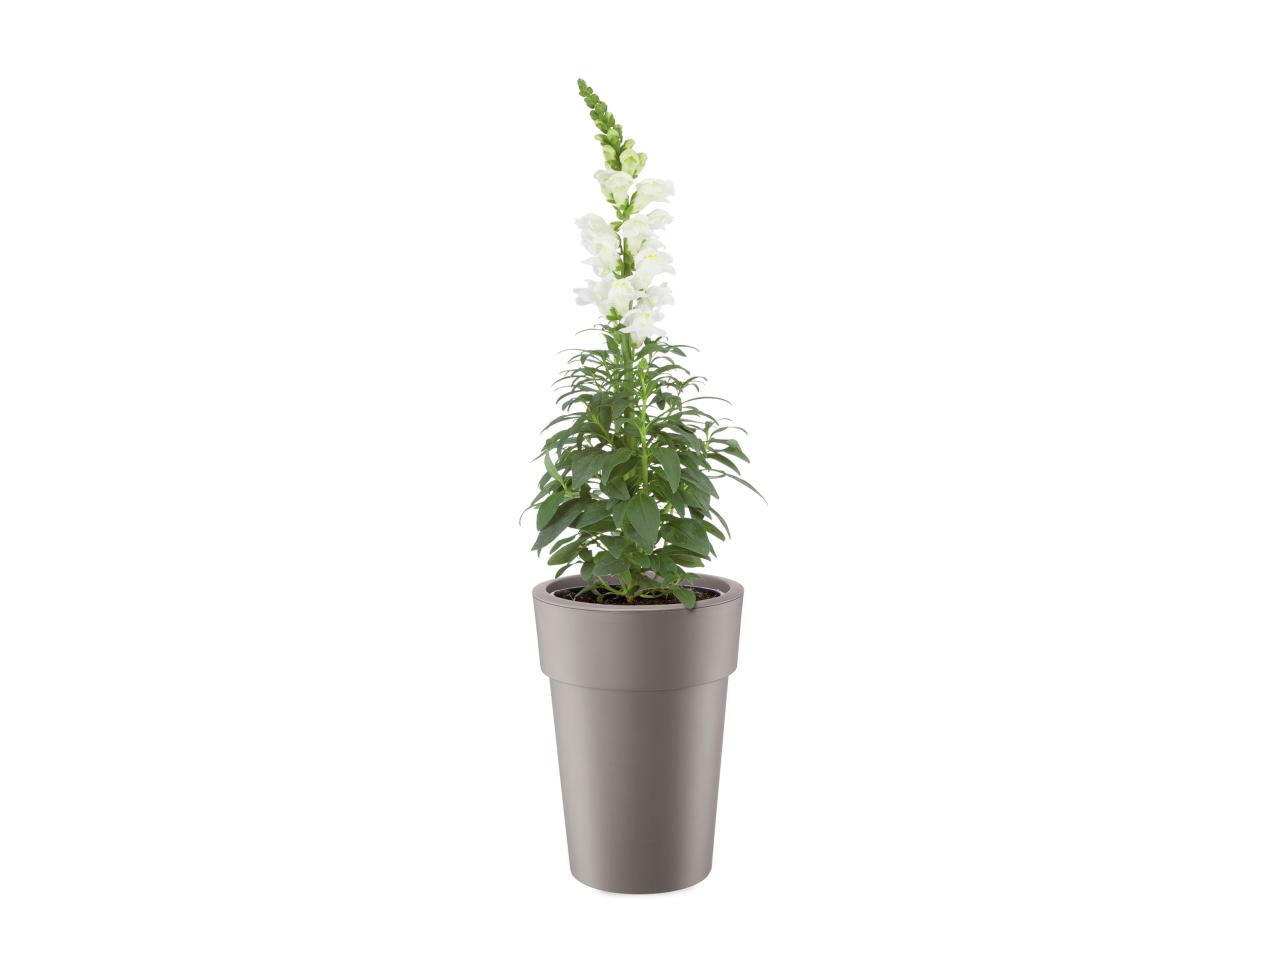 Florabest Plant Pot - Available from 30th April1